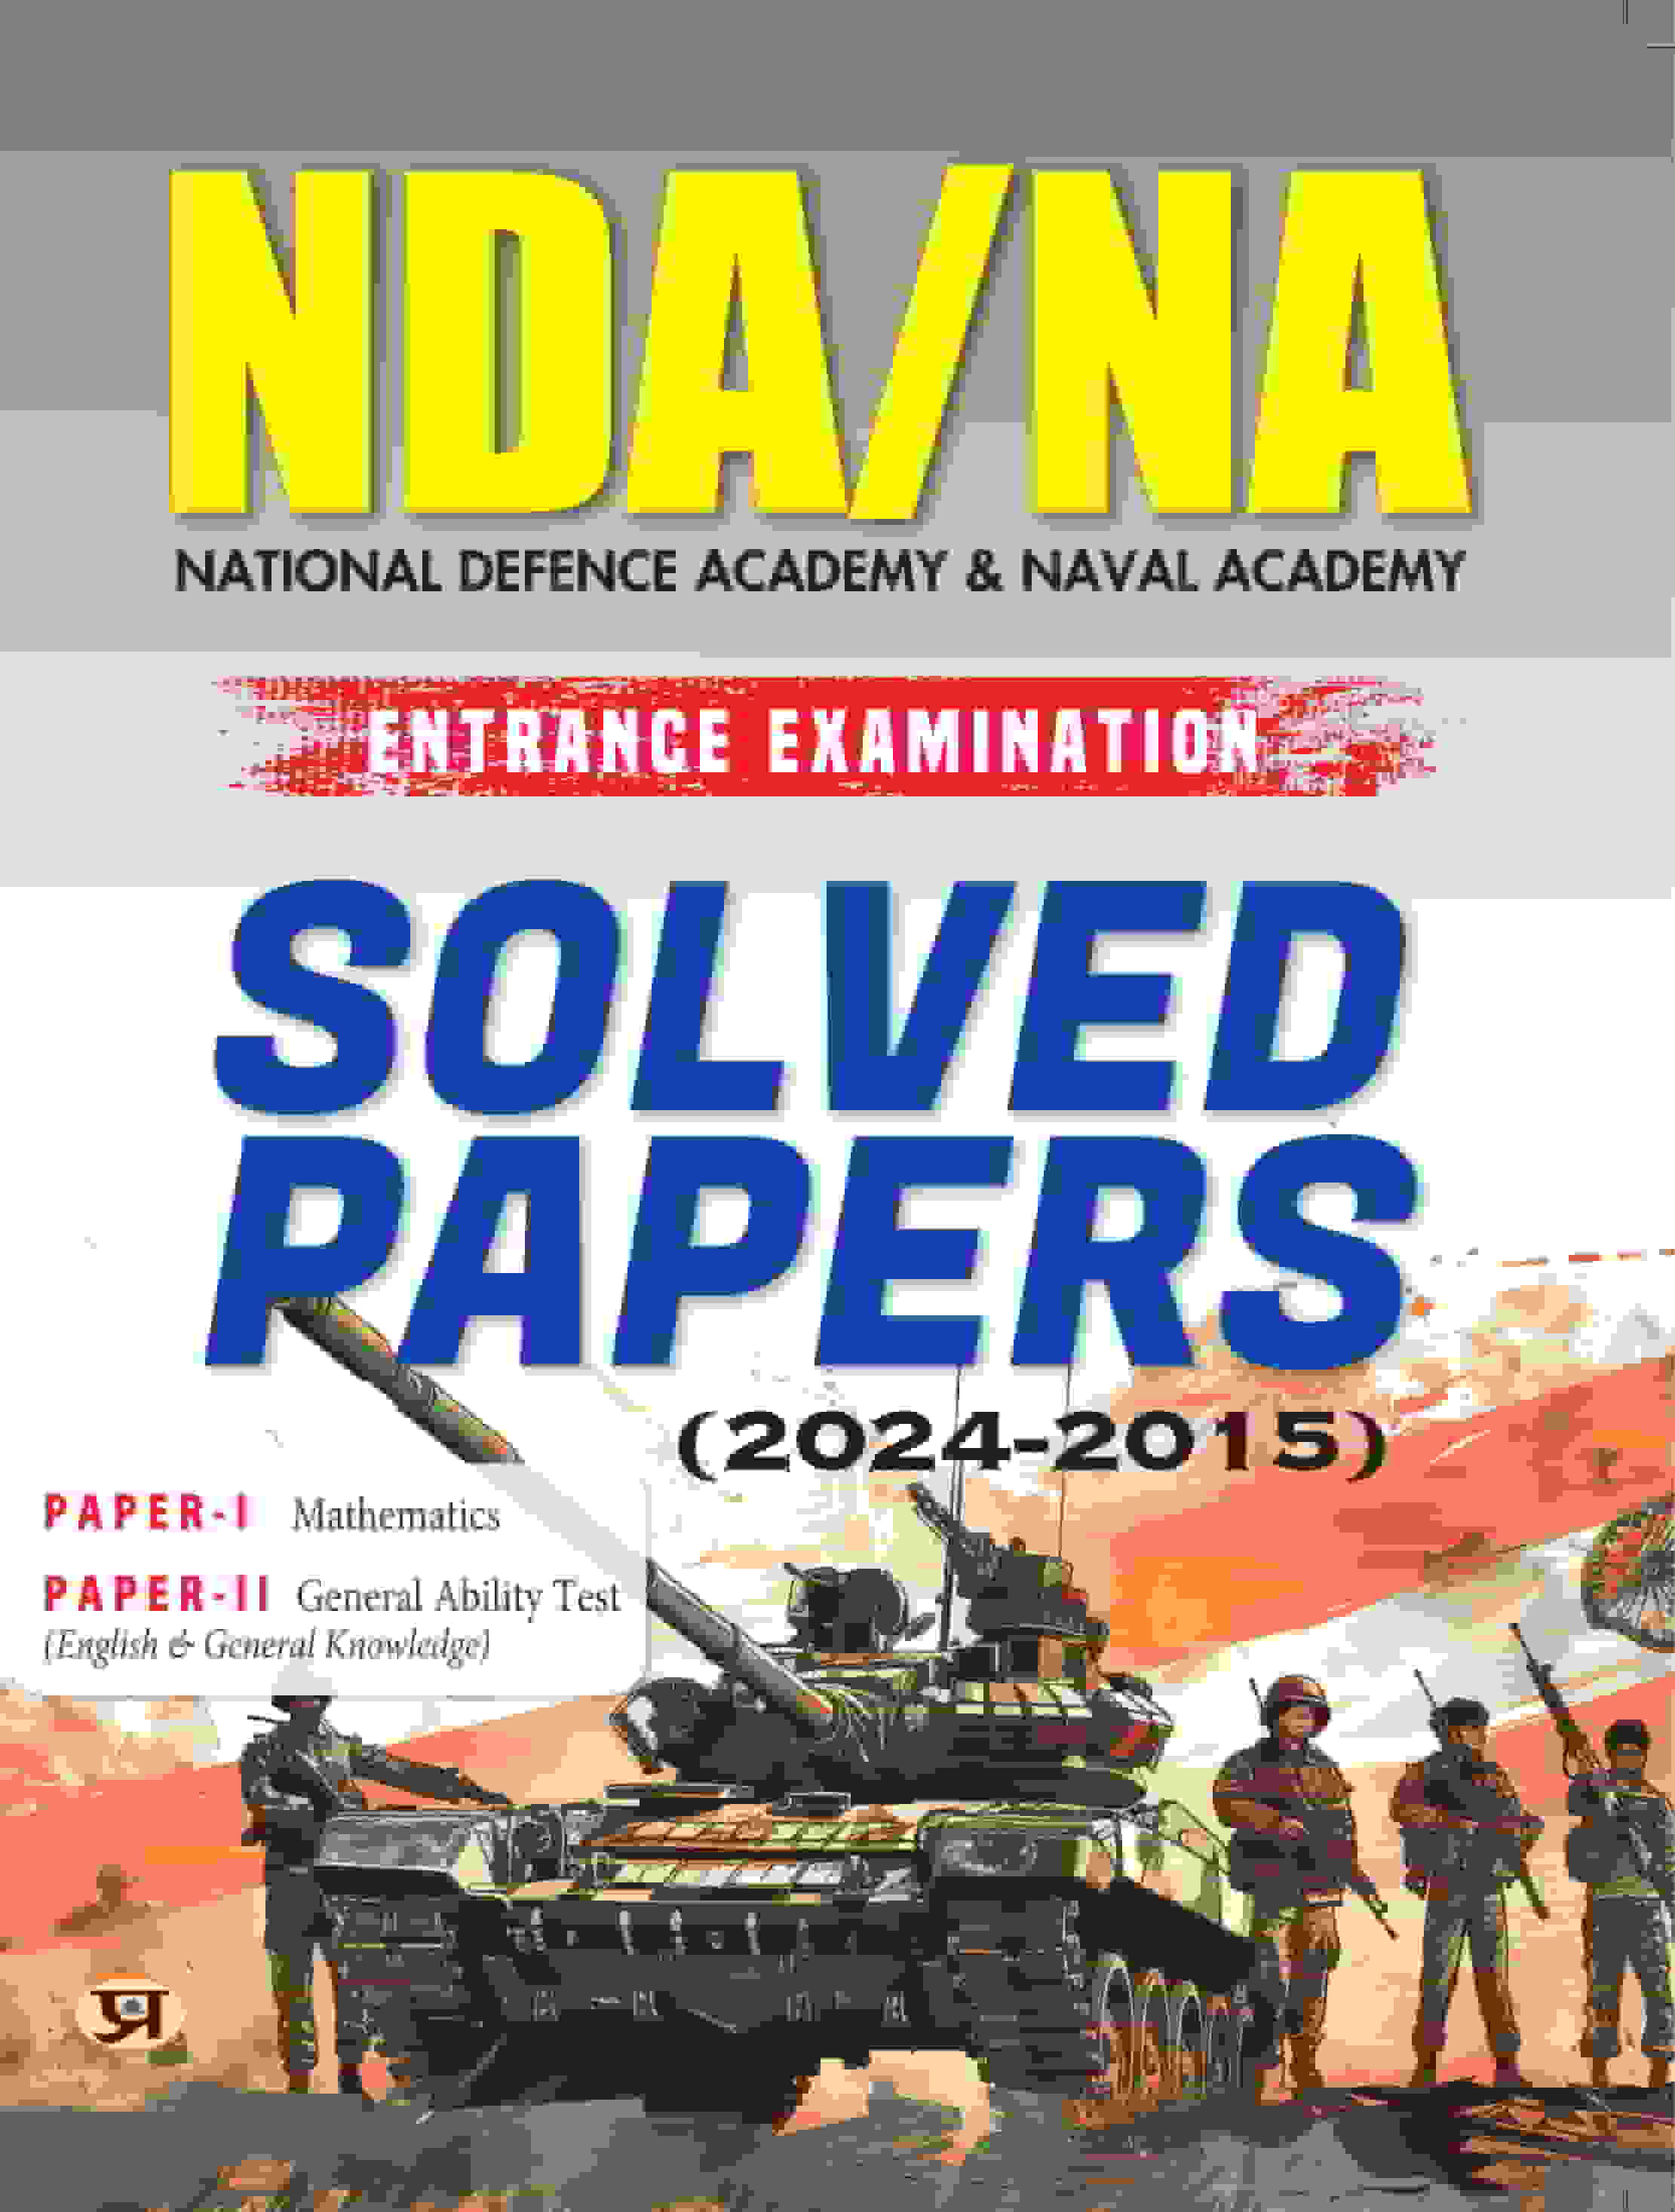 NDA/NA National Defence Academy & Naval Academy Entrance Examination Solved Papers (2024-2015) | Paper 1 (Mathematics) & Paper 2 (General Ability Test)